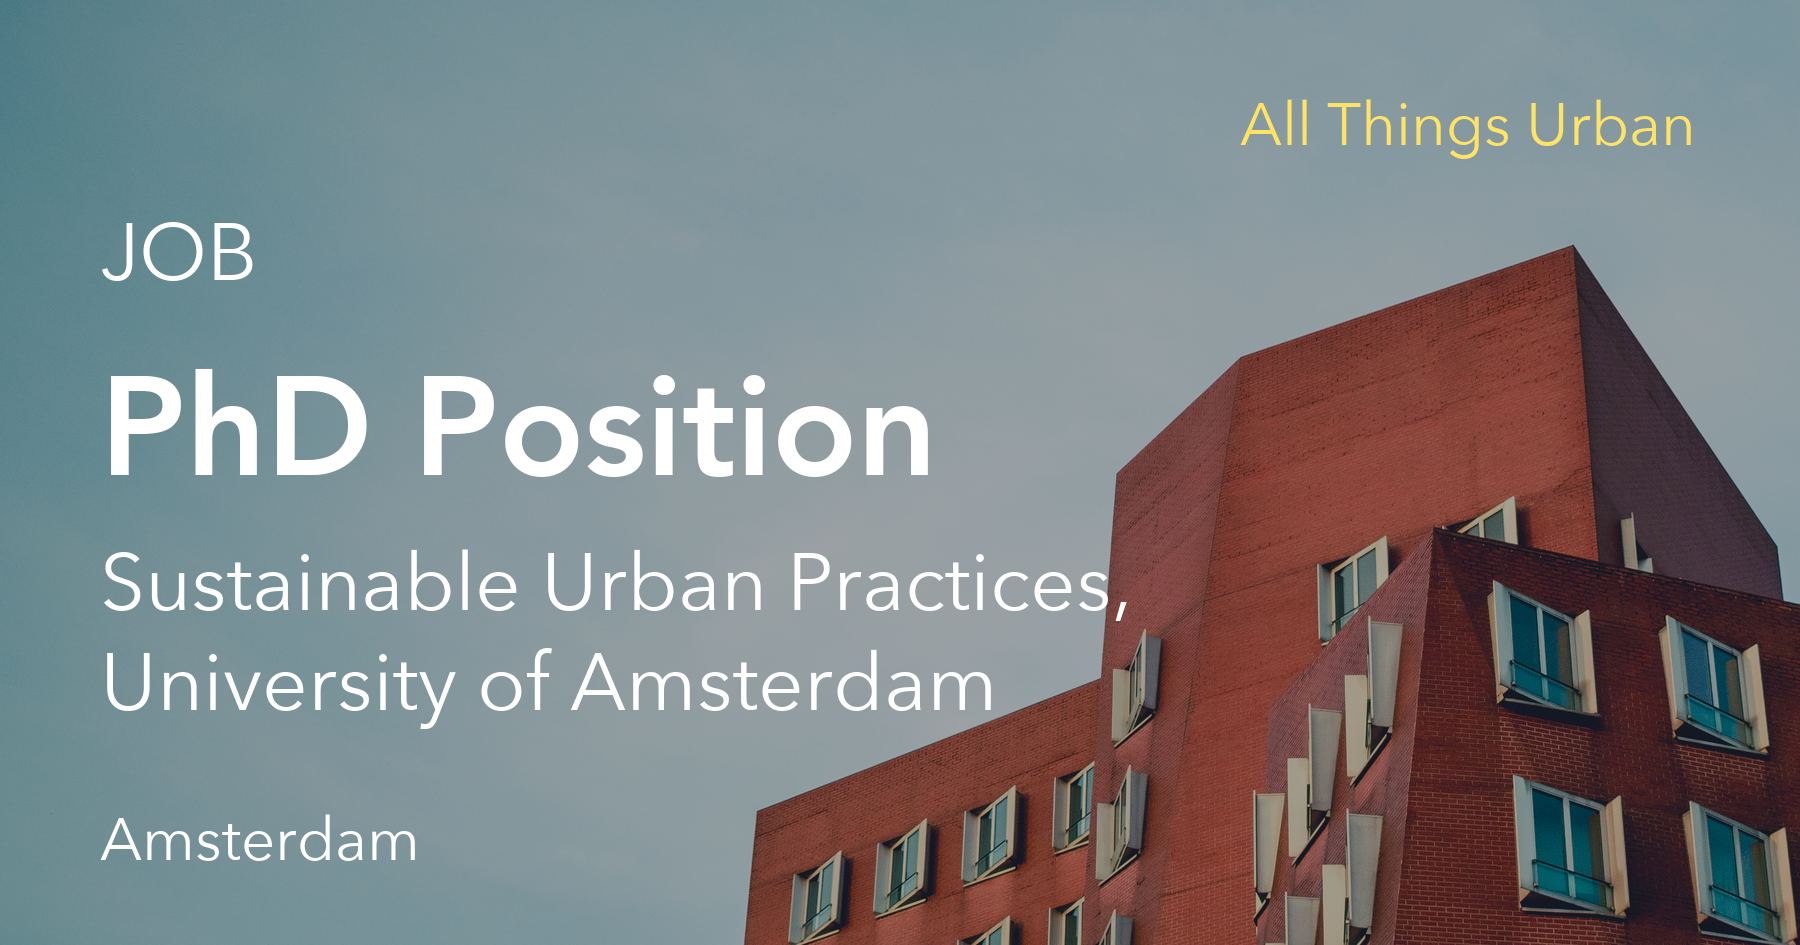 phd positions in urban planning in europe